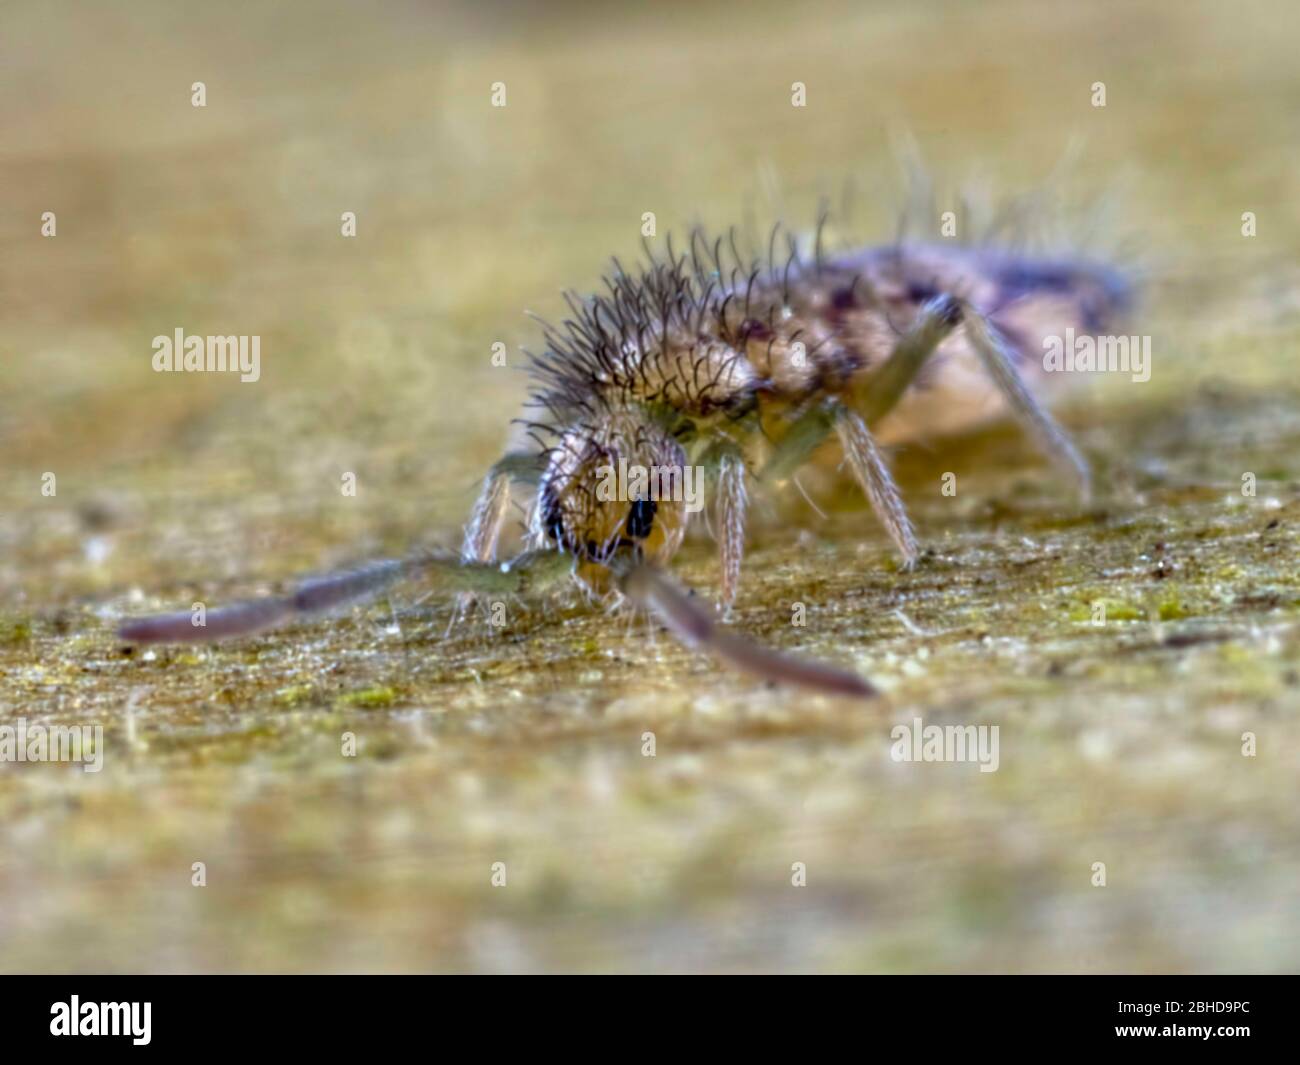 Elongated-bodied springtail Stock Photo